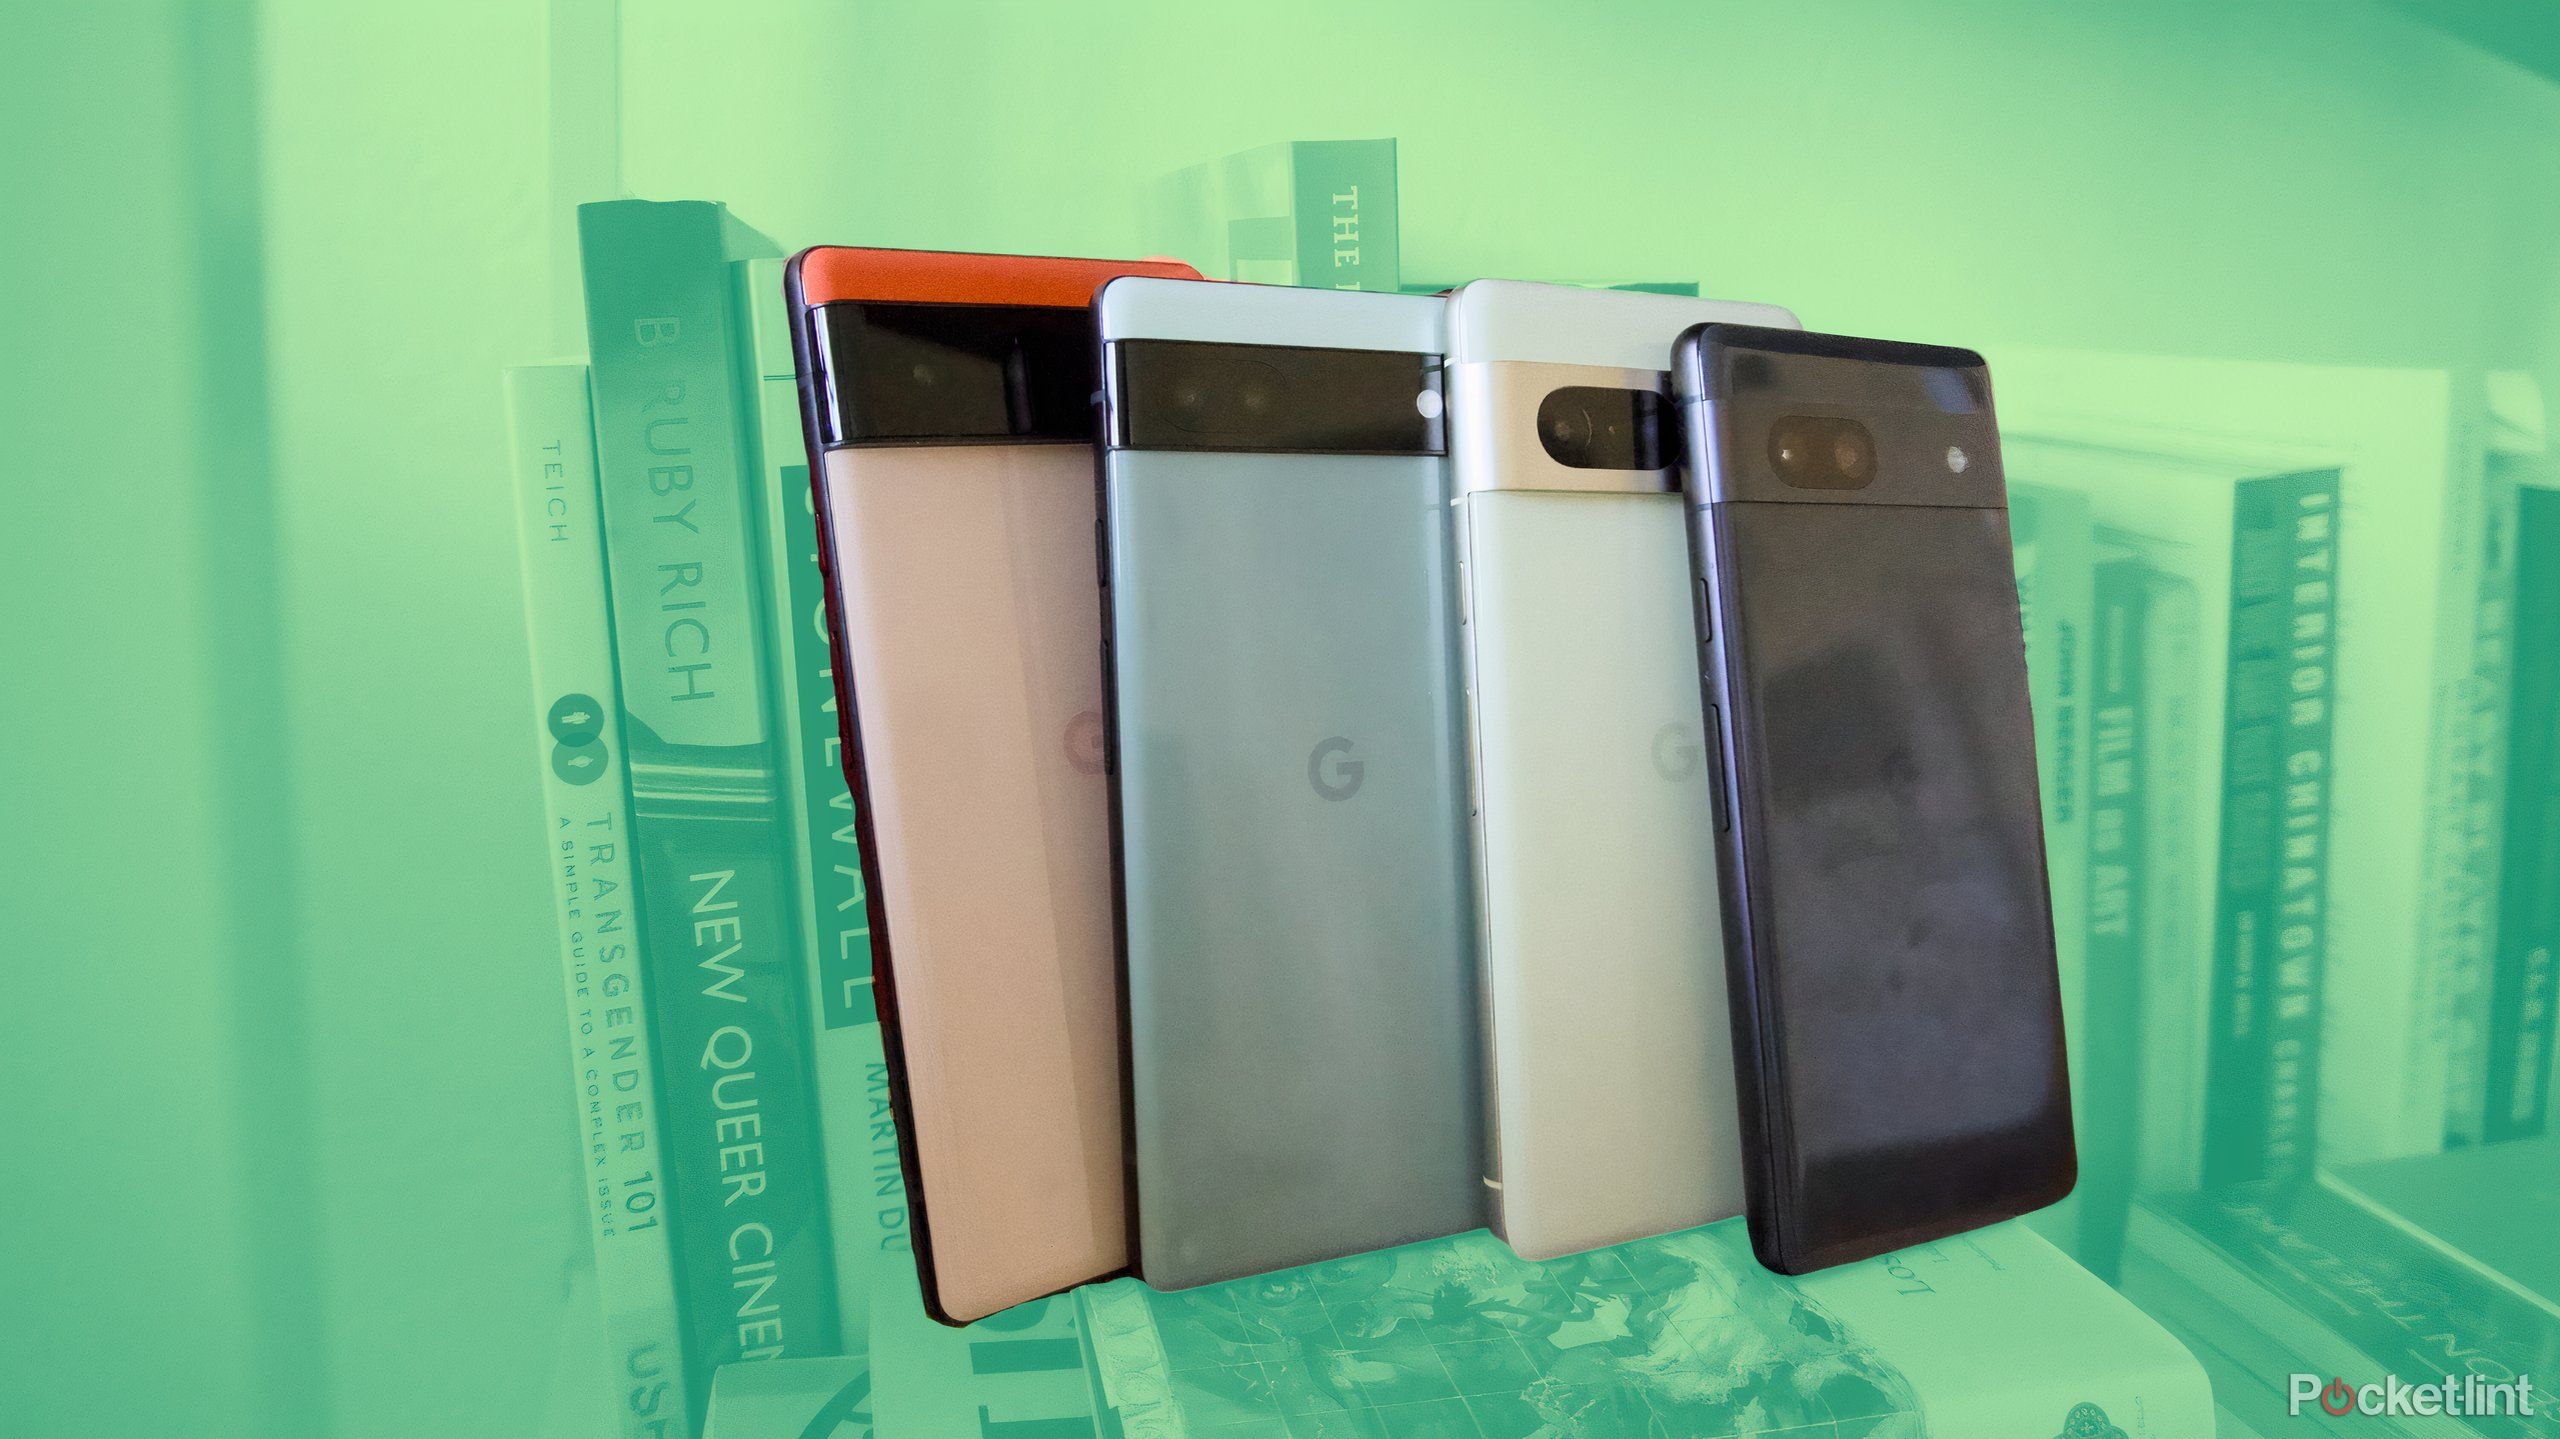 A Pixel 6, Pixel 6a, Pixel 7, and Pixel 7a lined up and leaning against a shelf of books.